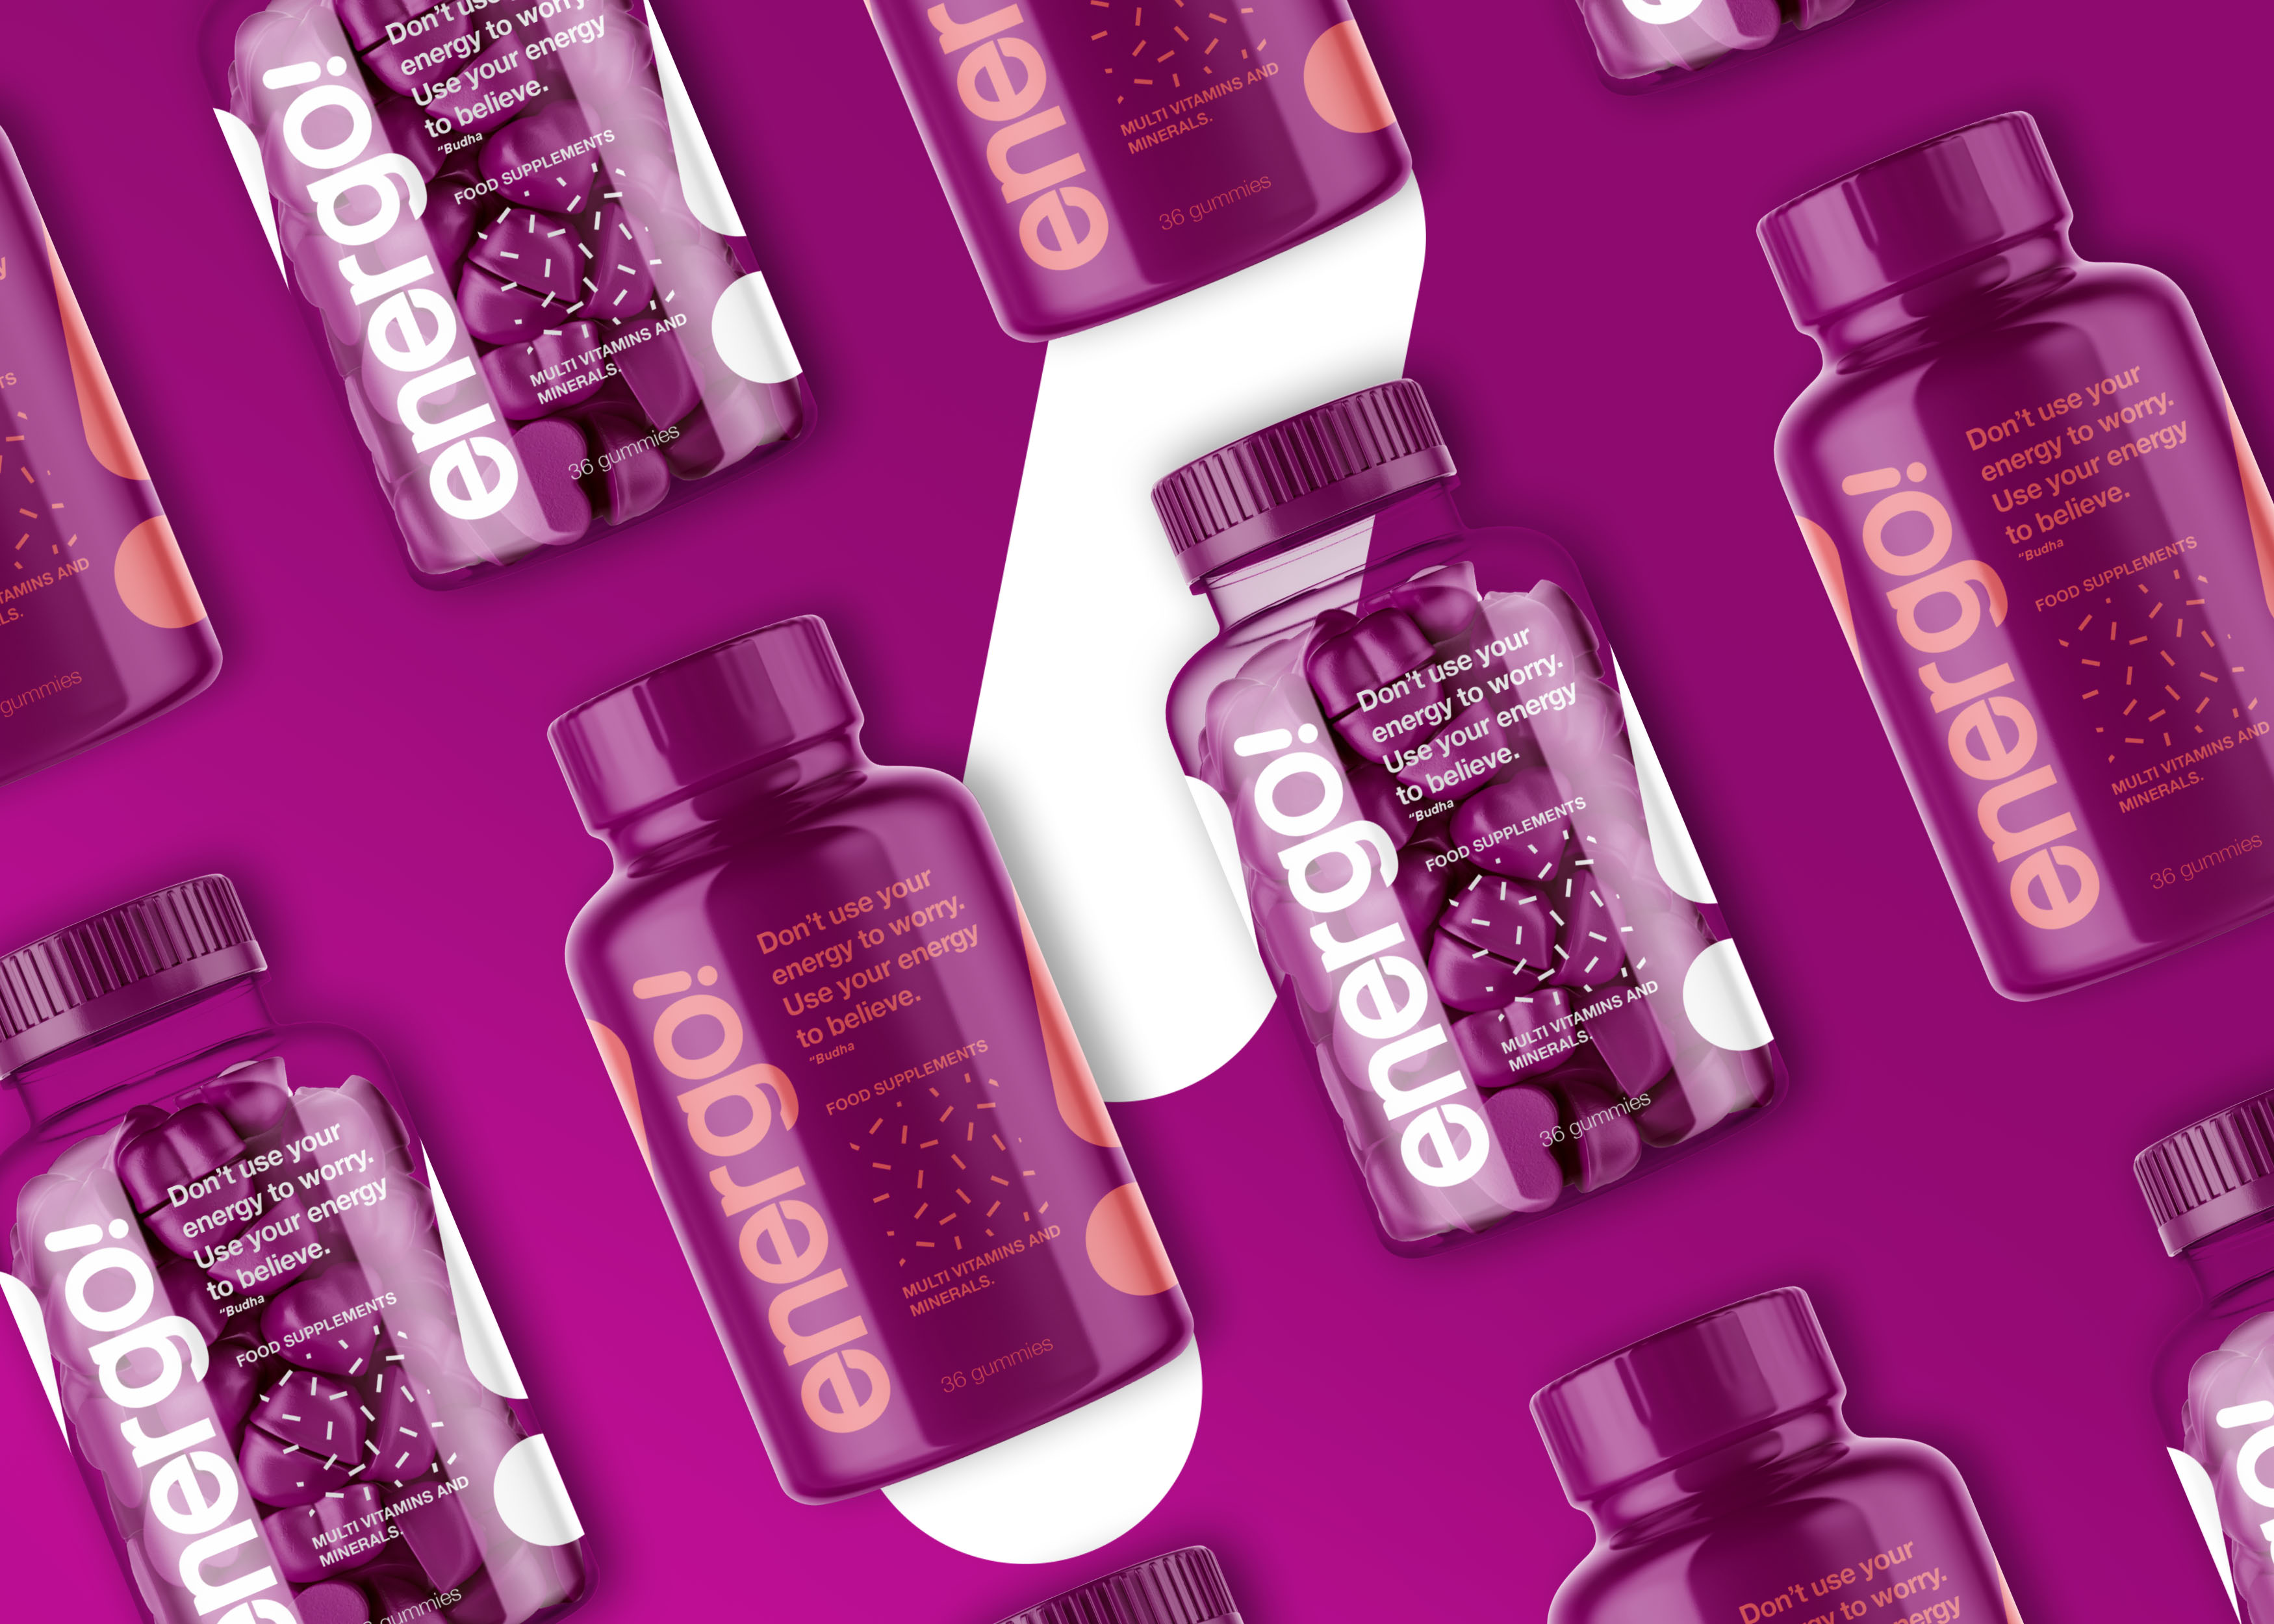 Creating New Packaging Design for Energo! Food Supplements